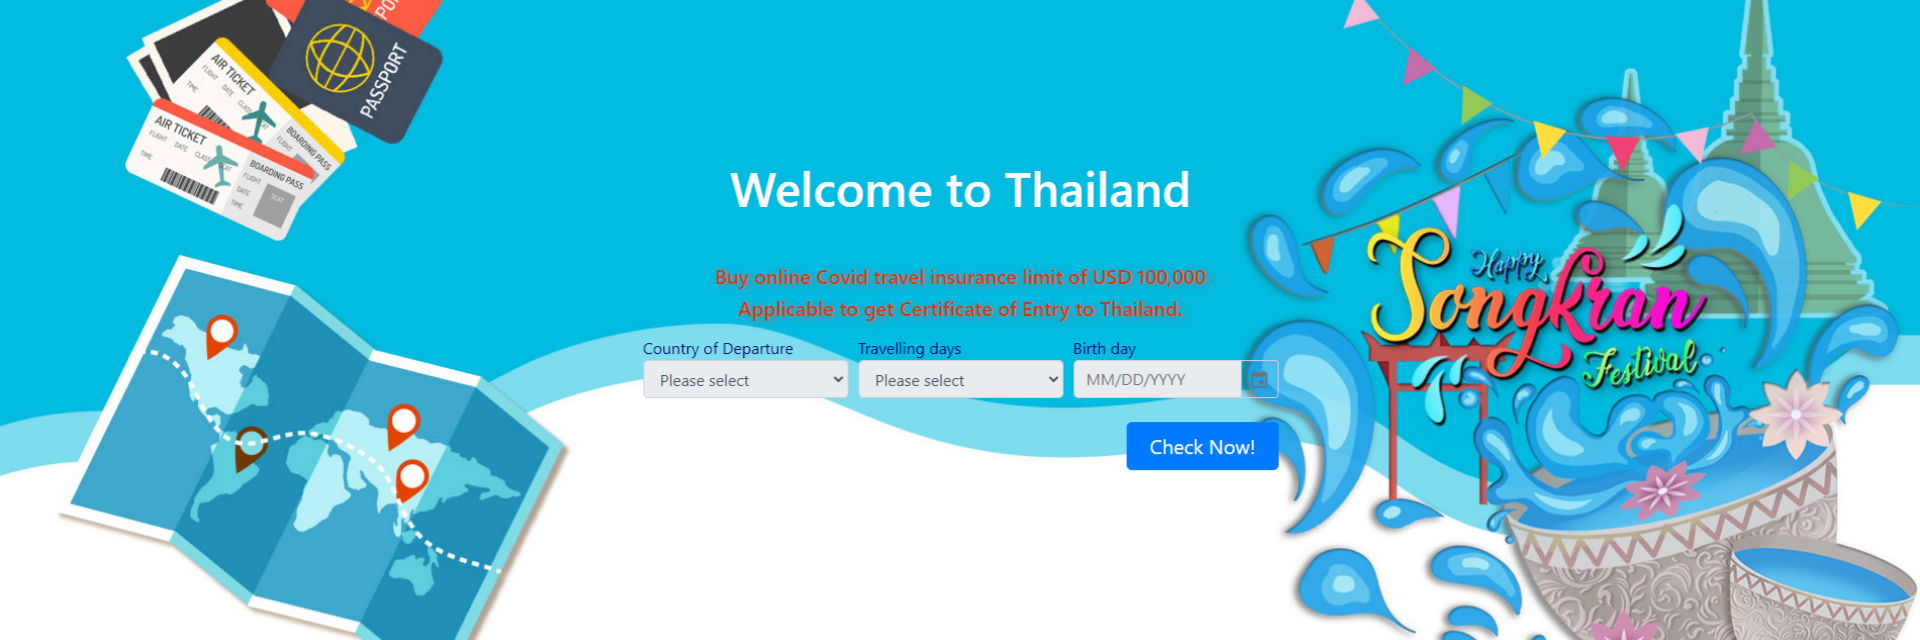 Introducing travel2thai.com / online Travel insurance to Thailand (USD